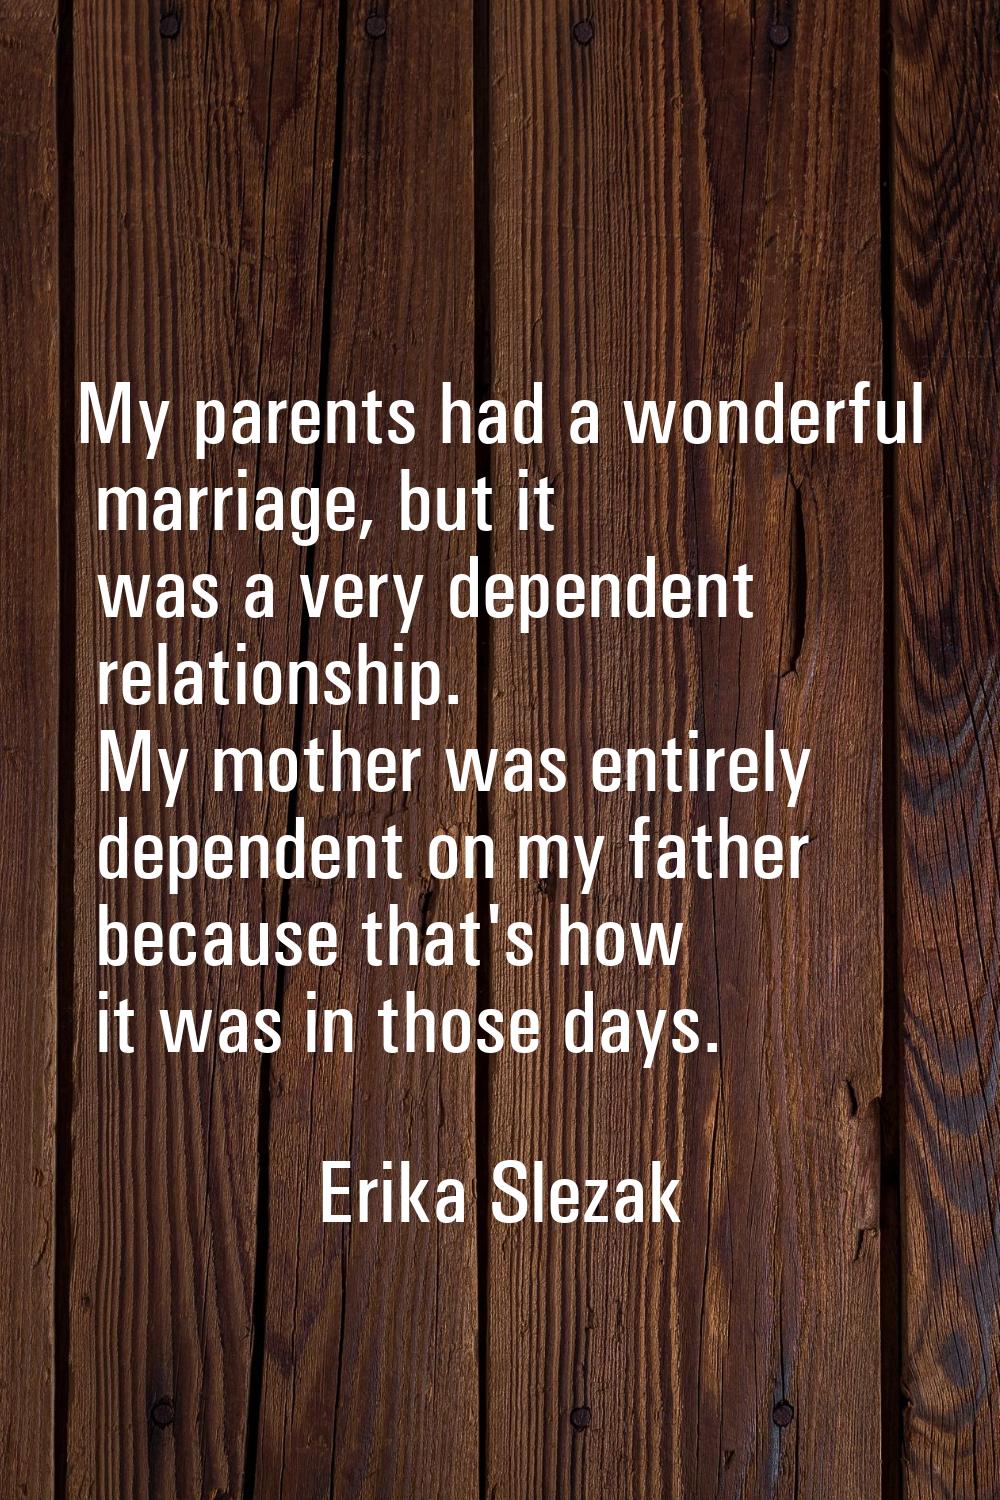 My parents had a wonderful marriage, but it was a very dependent relationship. My mother was entire